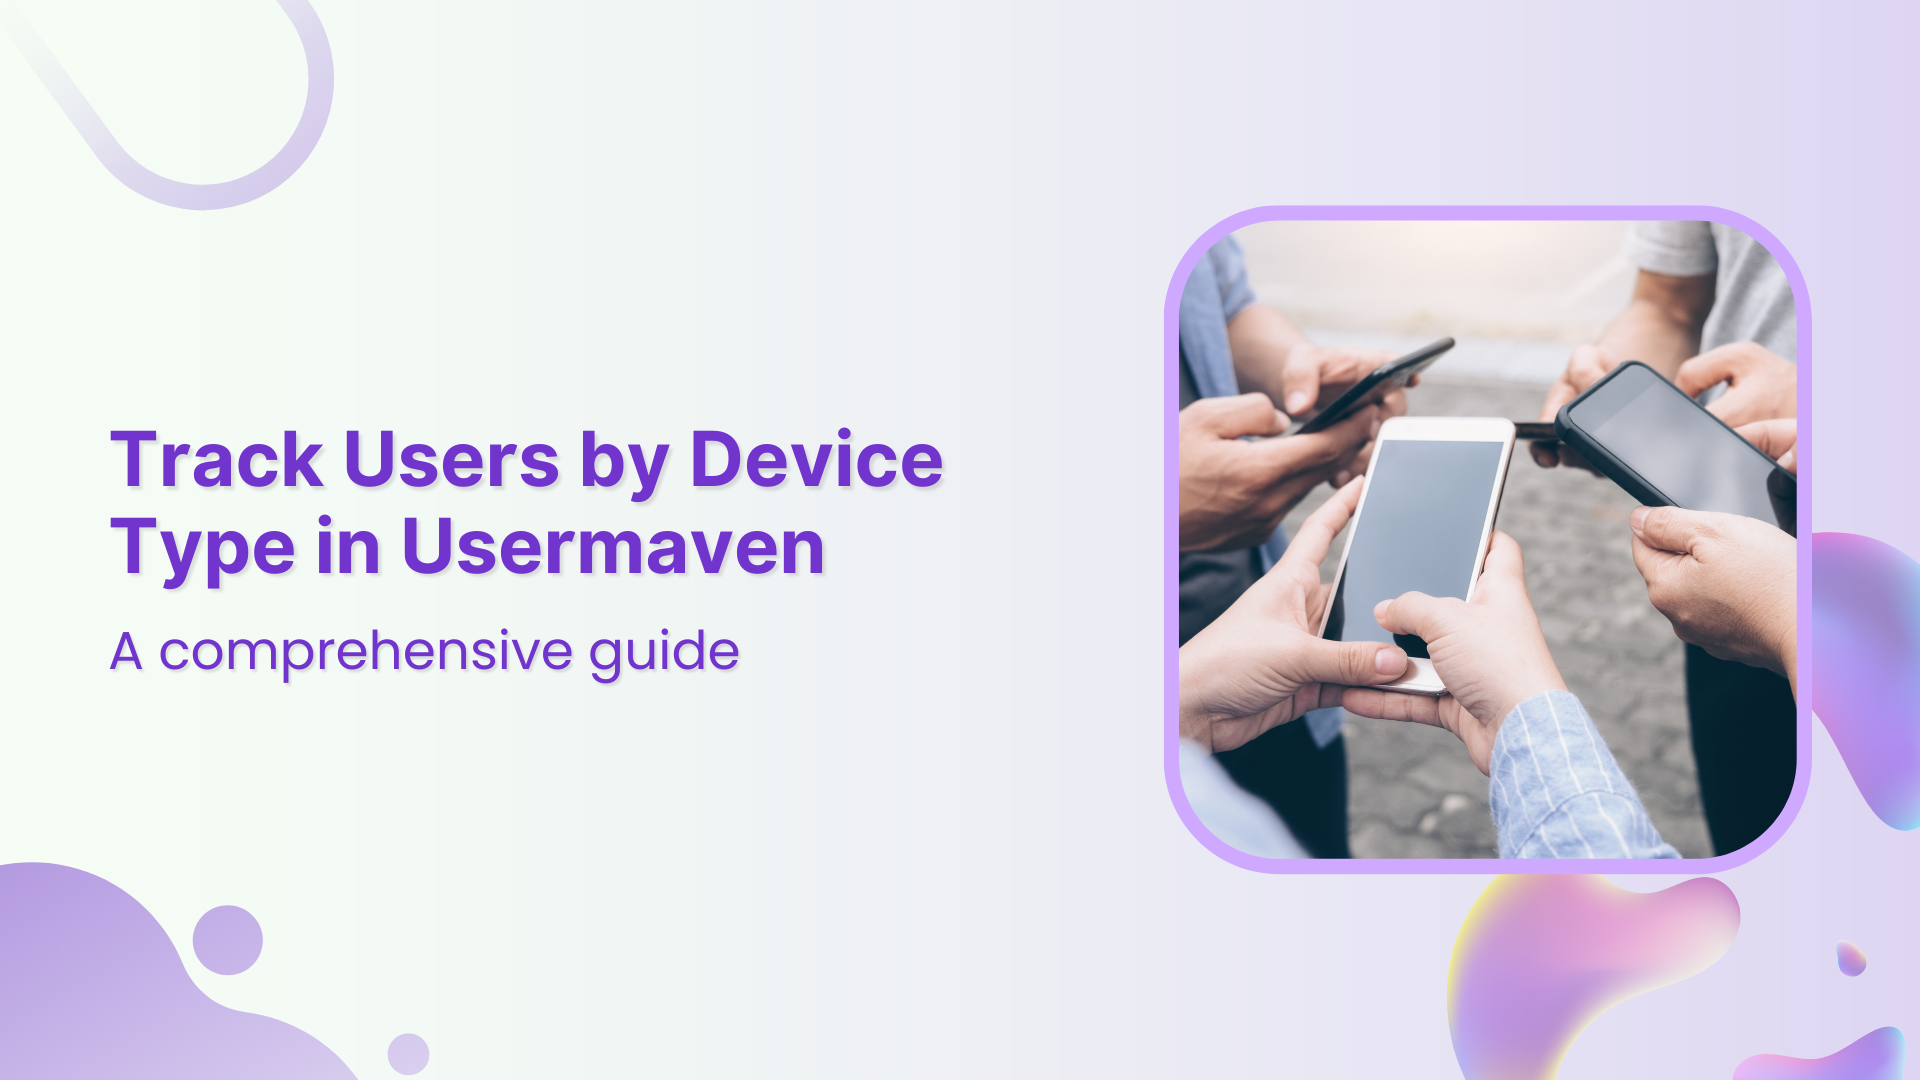 How to Locate Users Based on Device Type in Usermaven